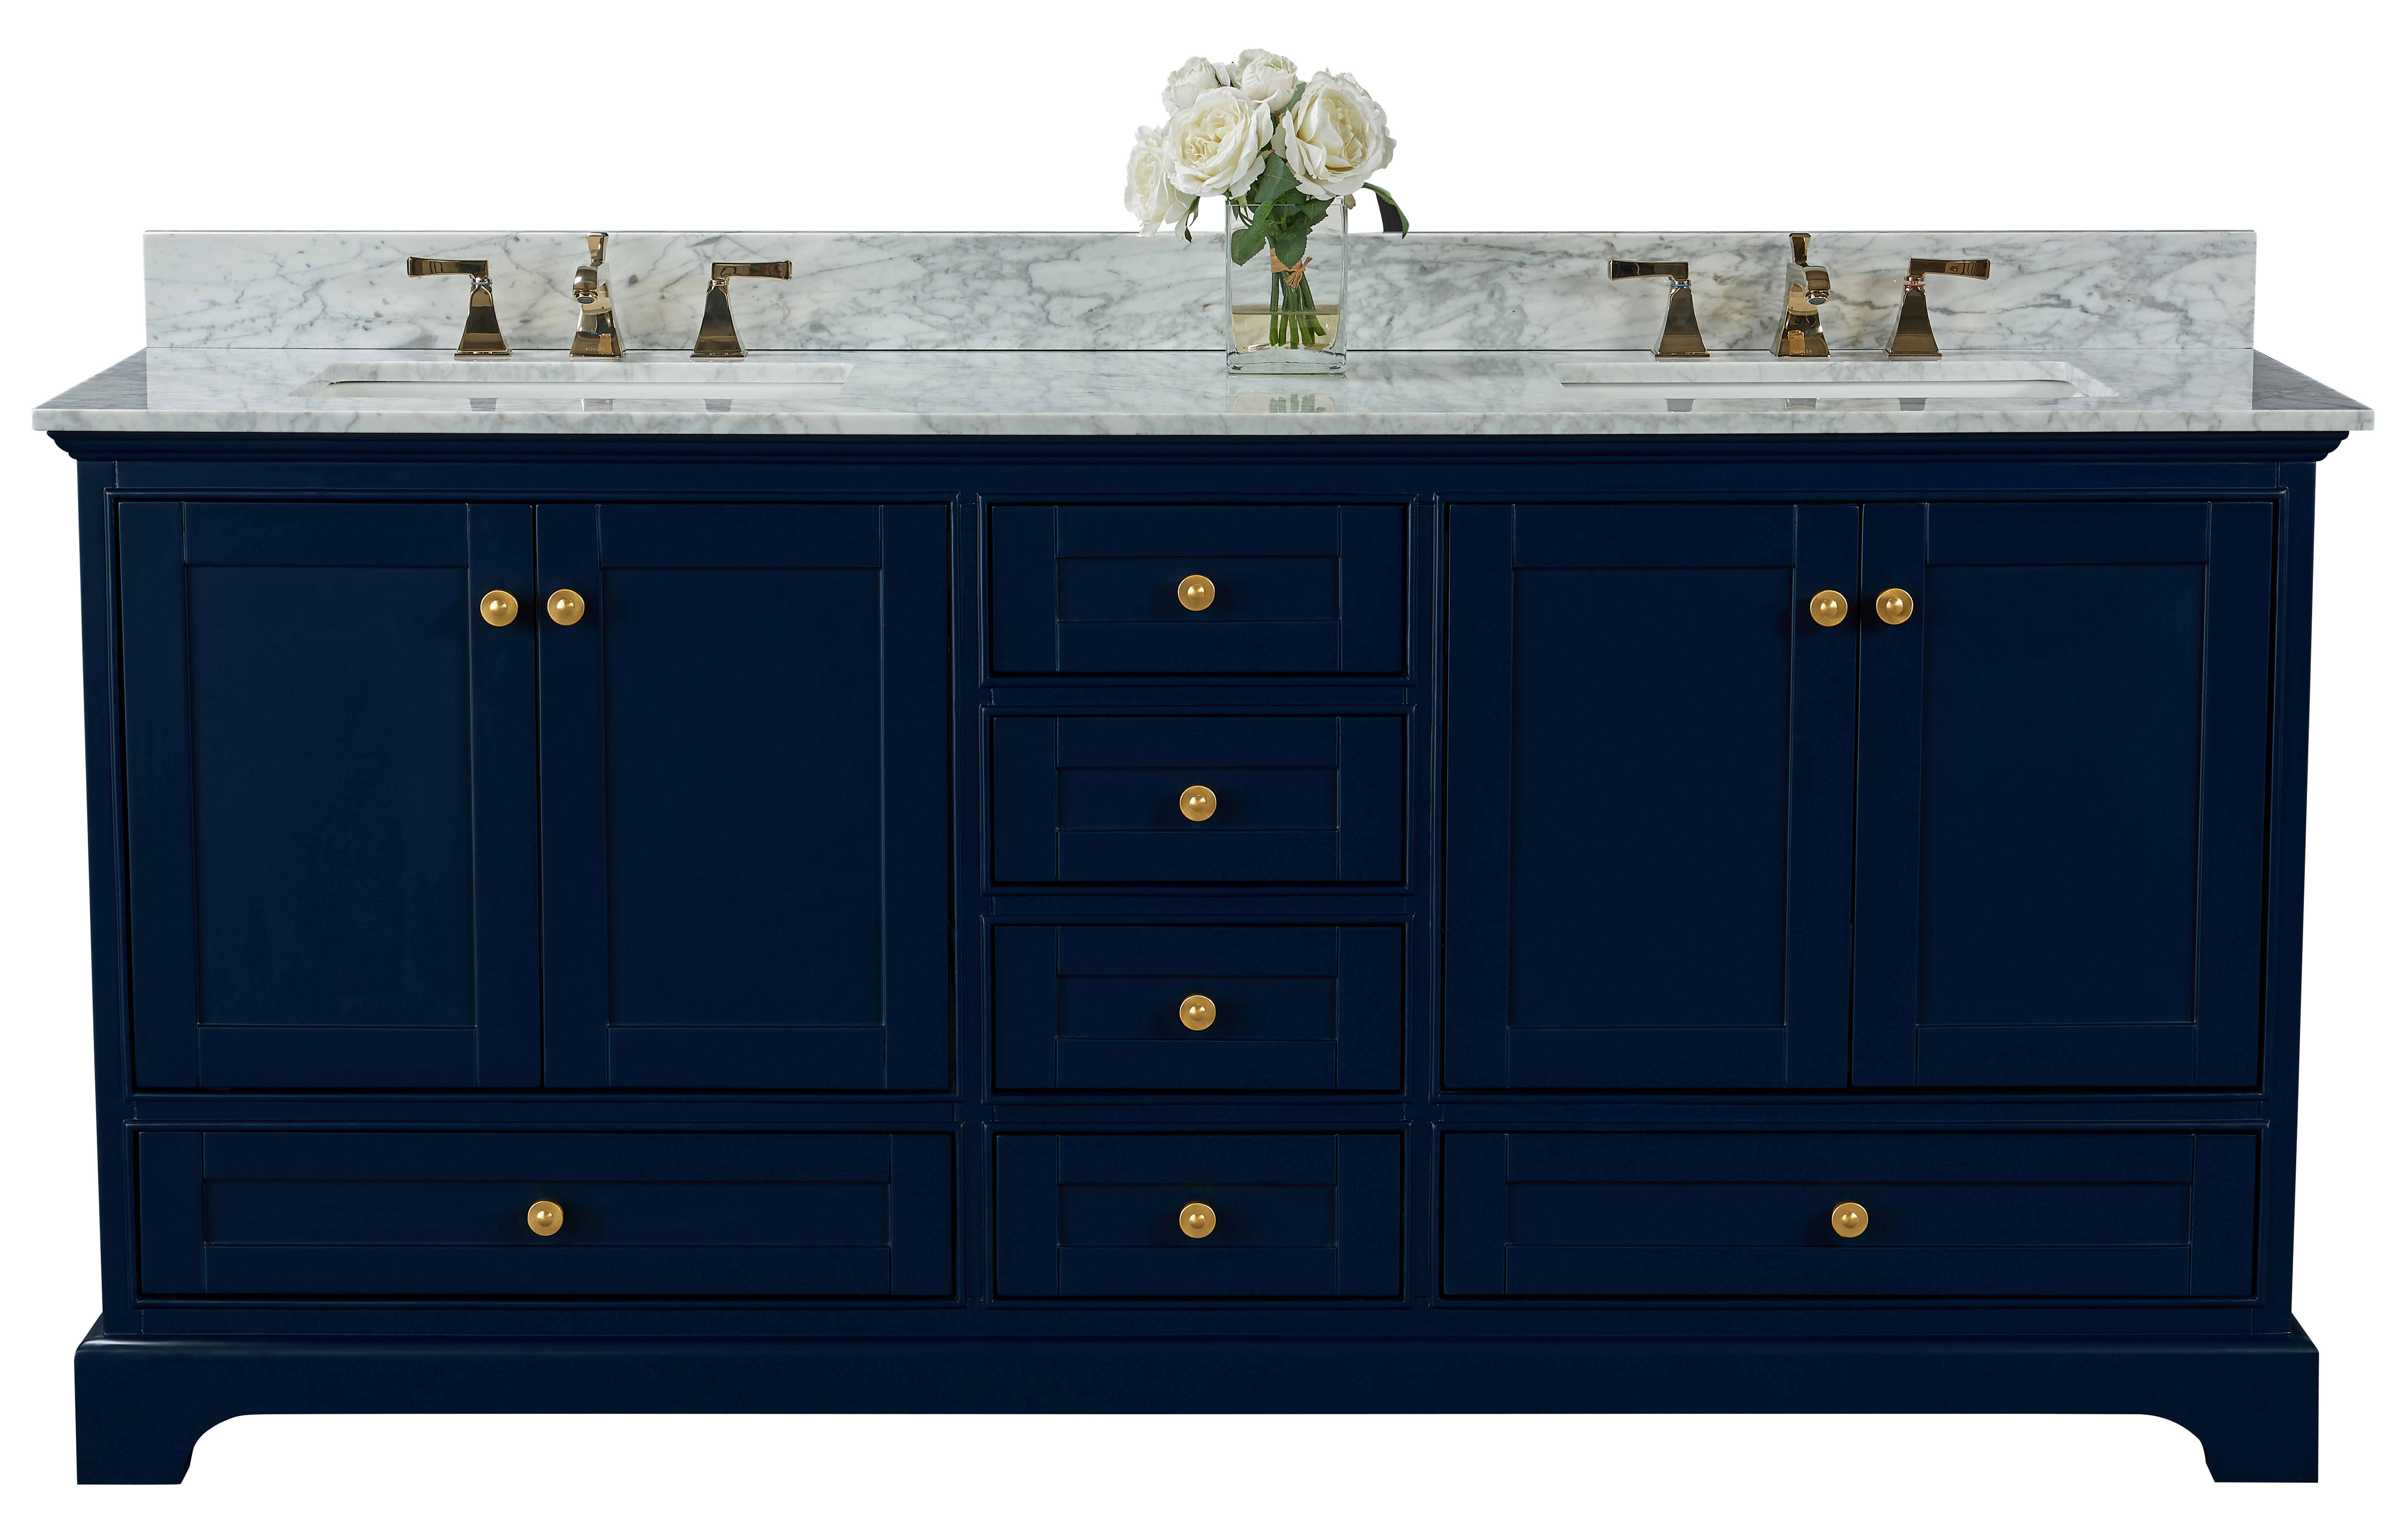 72" Bath Vanity Set in Heritage Blue with Italian Carrara White Marble Vanity top and White Undermount Basin with Gold Hardware with Color Options